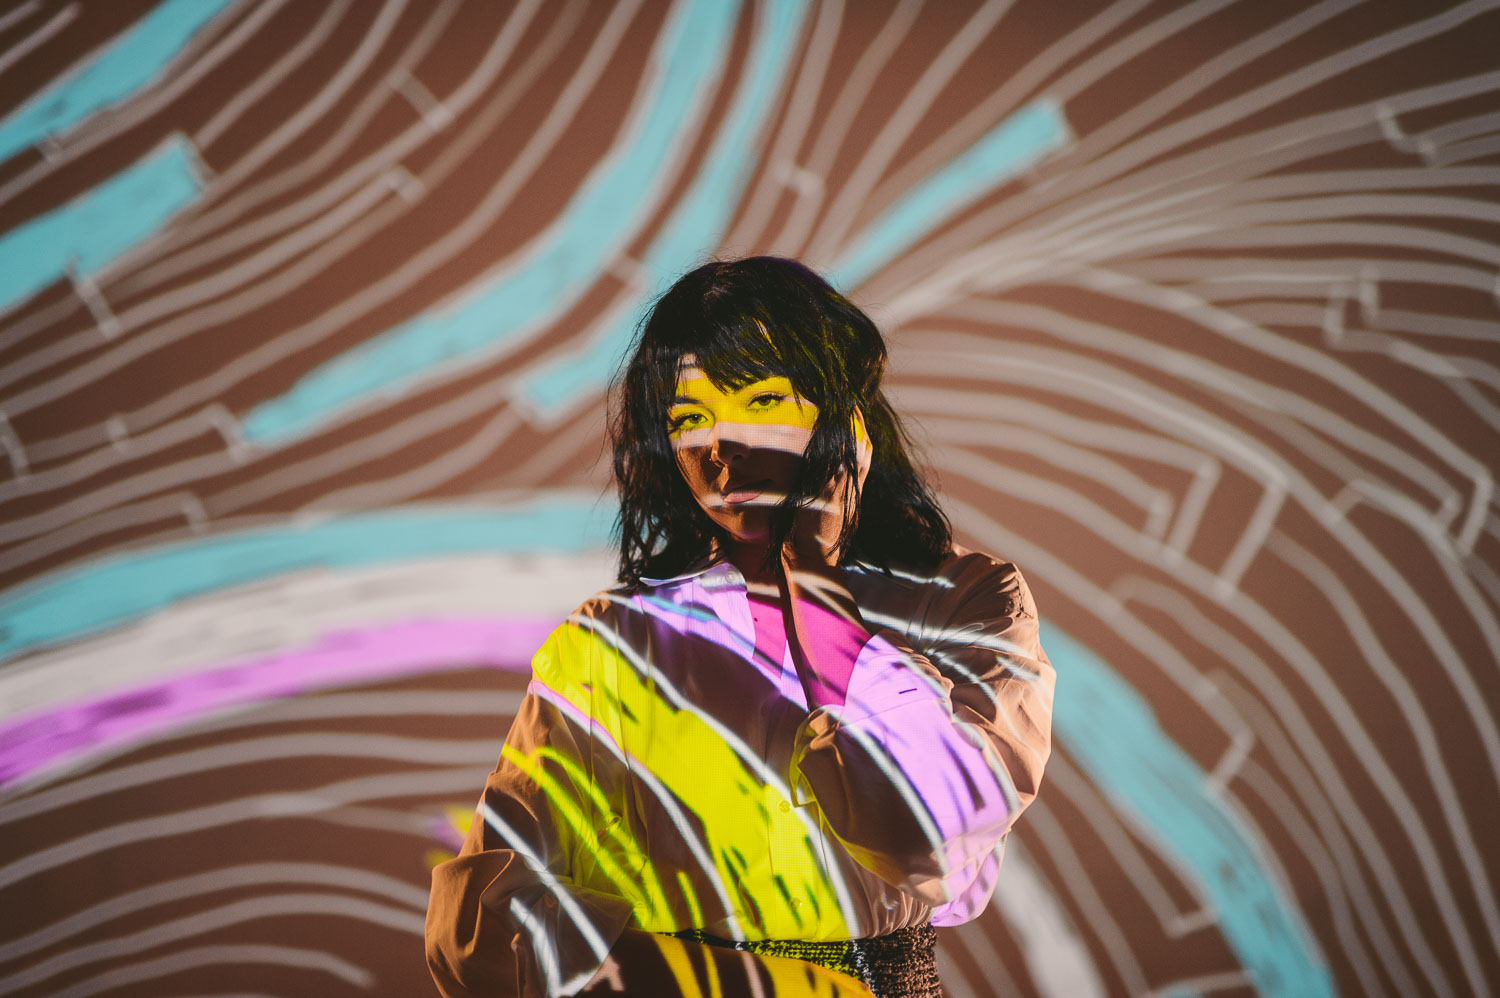 Artwalk Self Projection with woman with black hair posing for camera with multiple colored artwork being projected on her